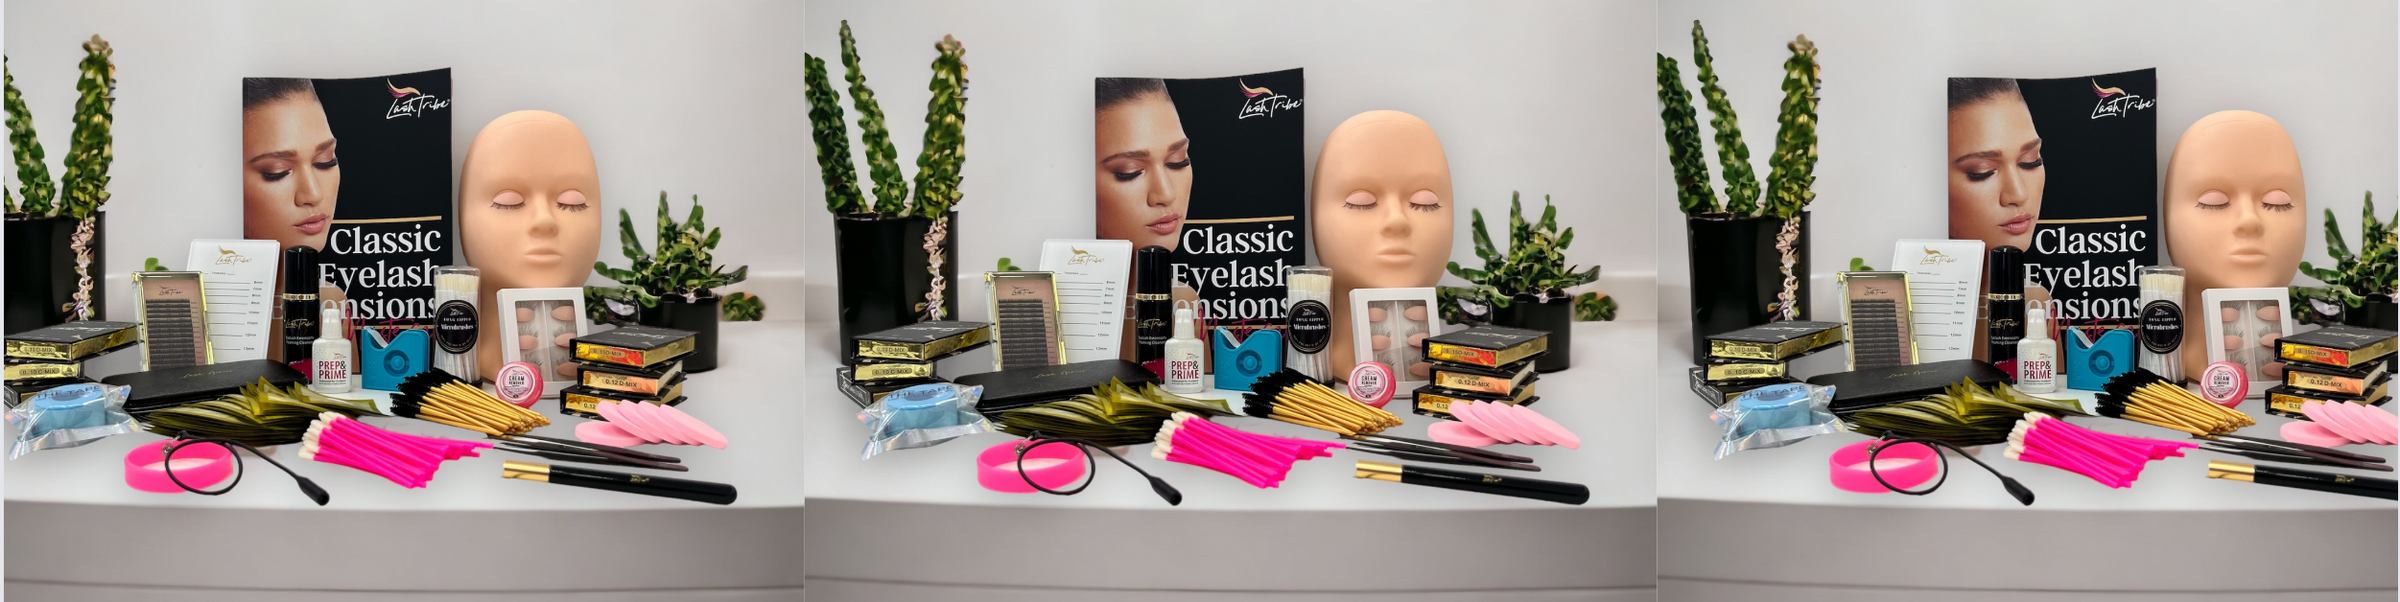 Pictured is an eyelash extension starter kit draped across a beautiful background, showcasing Lash Tribe products